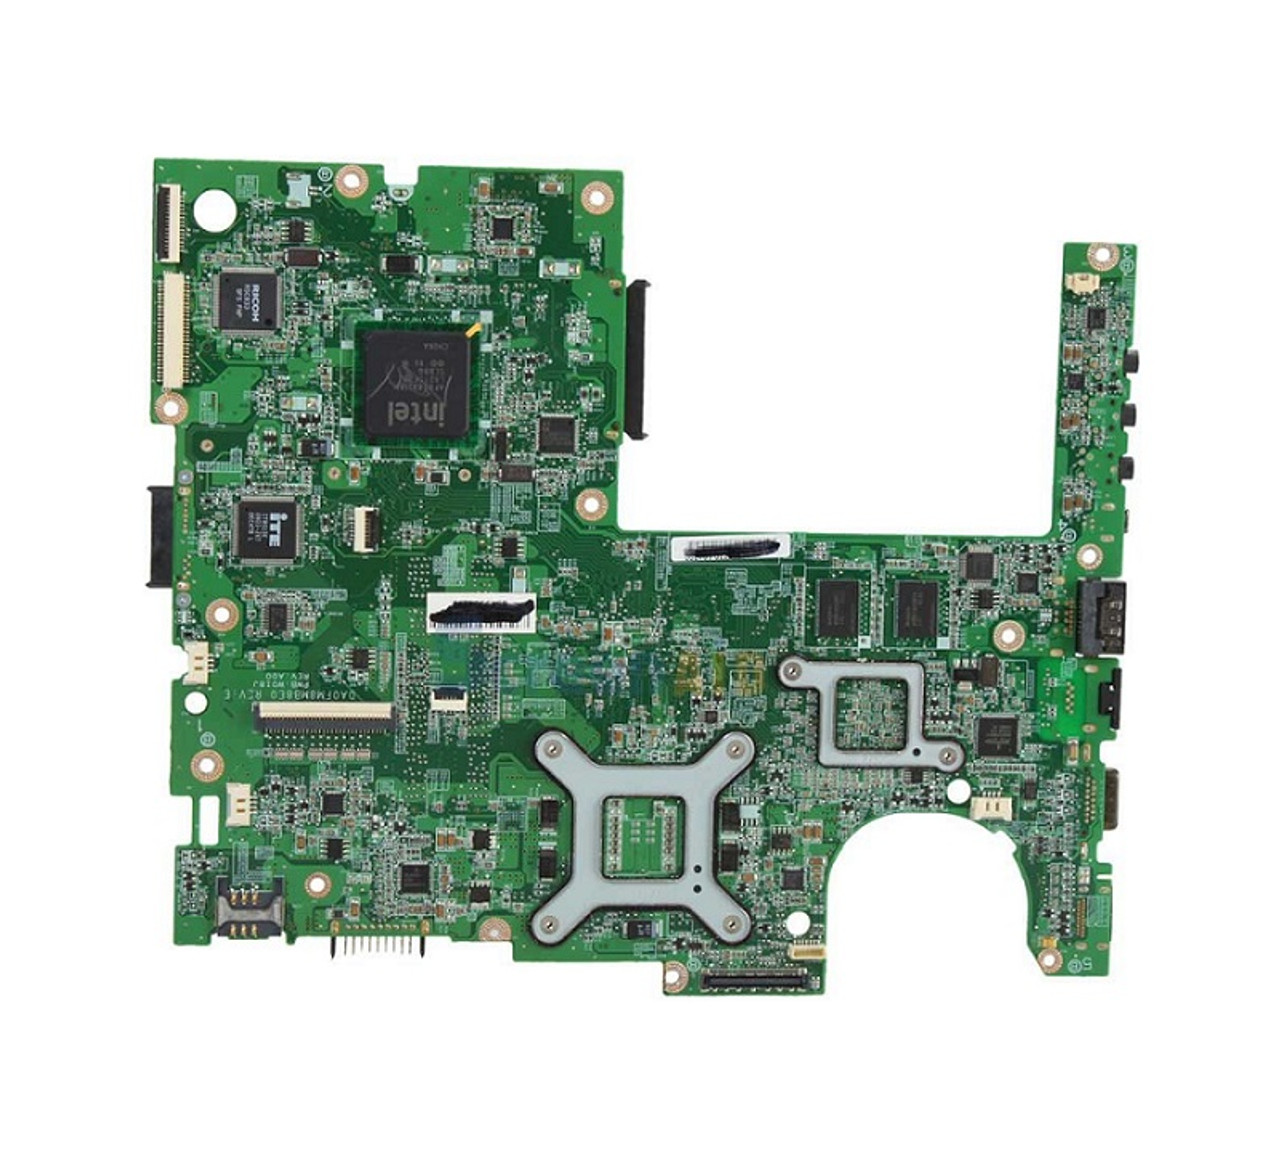 0D1WHF - Dell System Board (Motherboard) Core i3 1.7GHz (i3-4005U) with CPU for Latitude 15 (3550) (Refurbished)